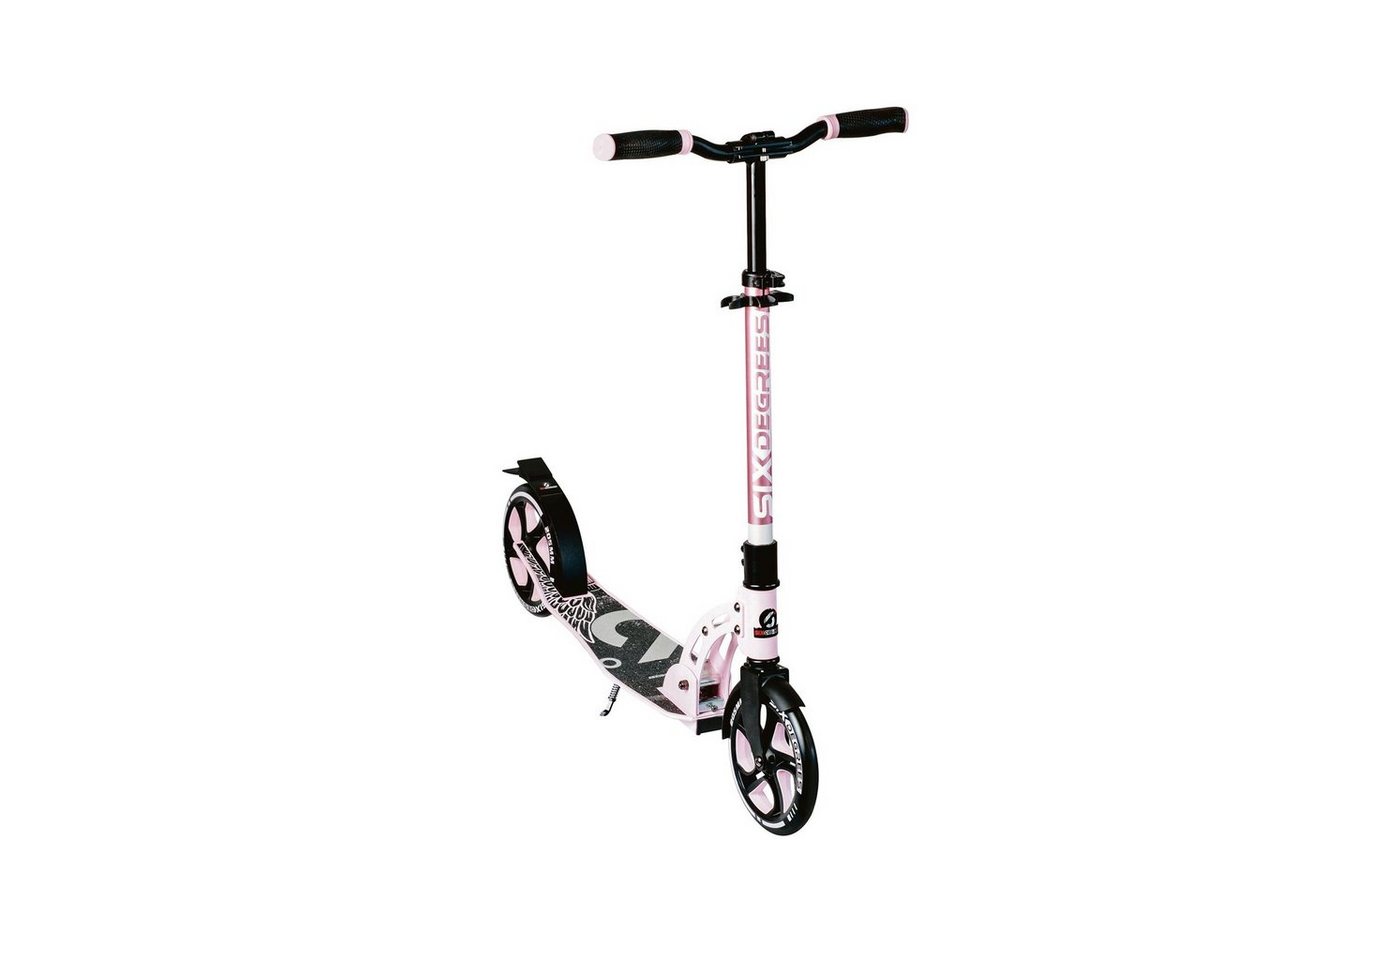 authentic sports & toys Scooter 569 SIX DEGREES Aluminium Scooter 205 mm pastell-pink von authentic sports & toys